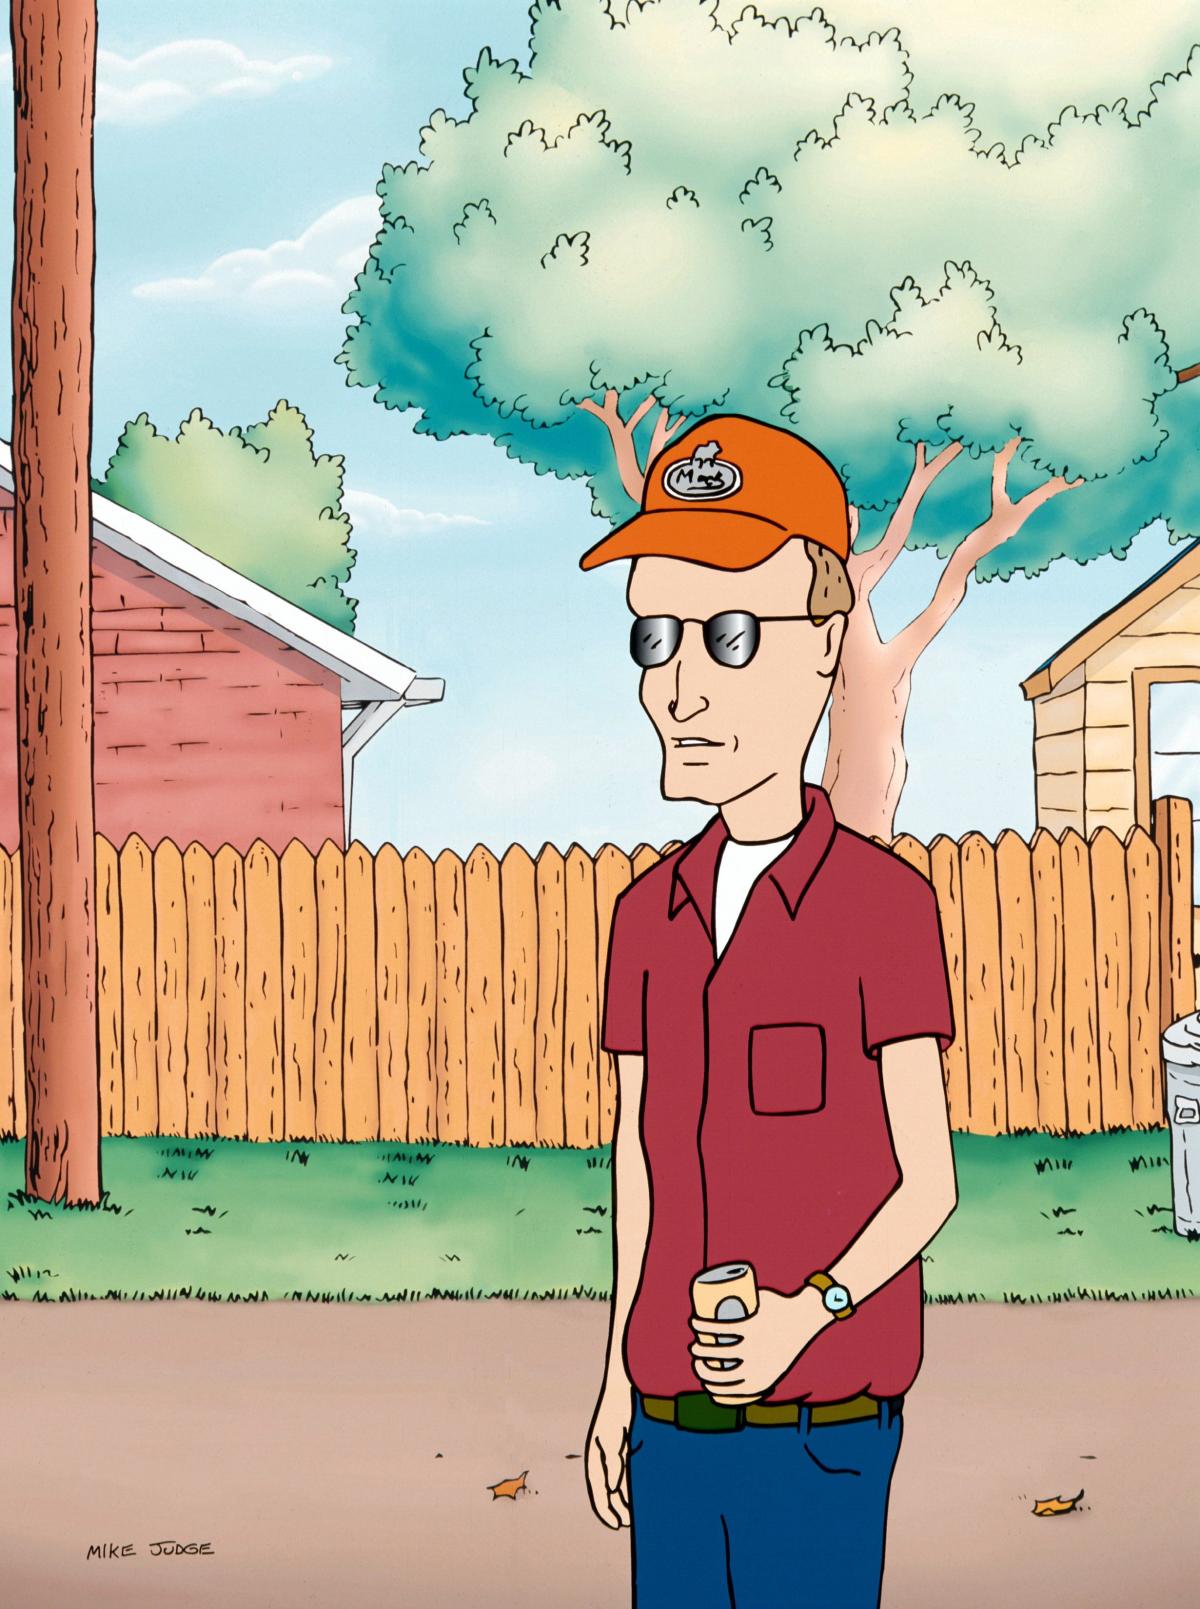 King of the Hill star Johnny Hardwick recorded new episodes before